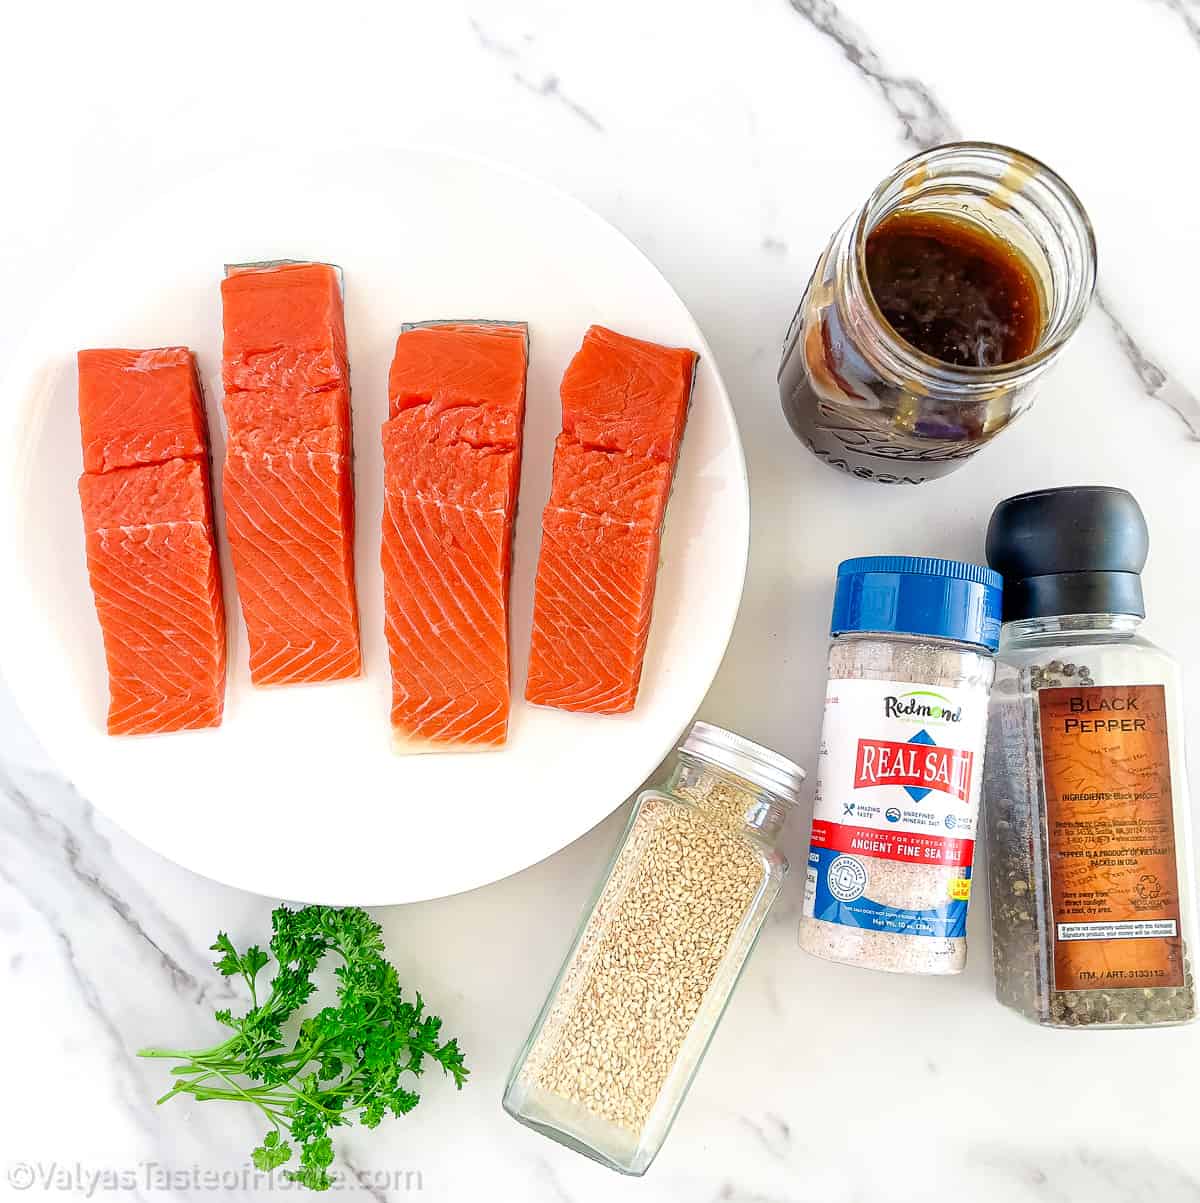 All you need are some simple pantry staple ingredients to make this teriyaki salmon recipe at home.